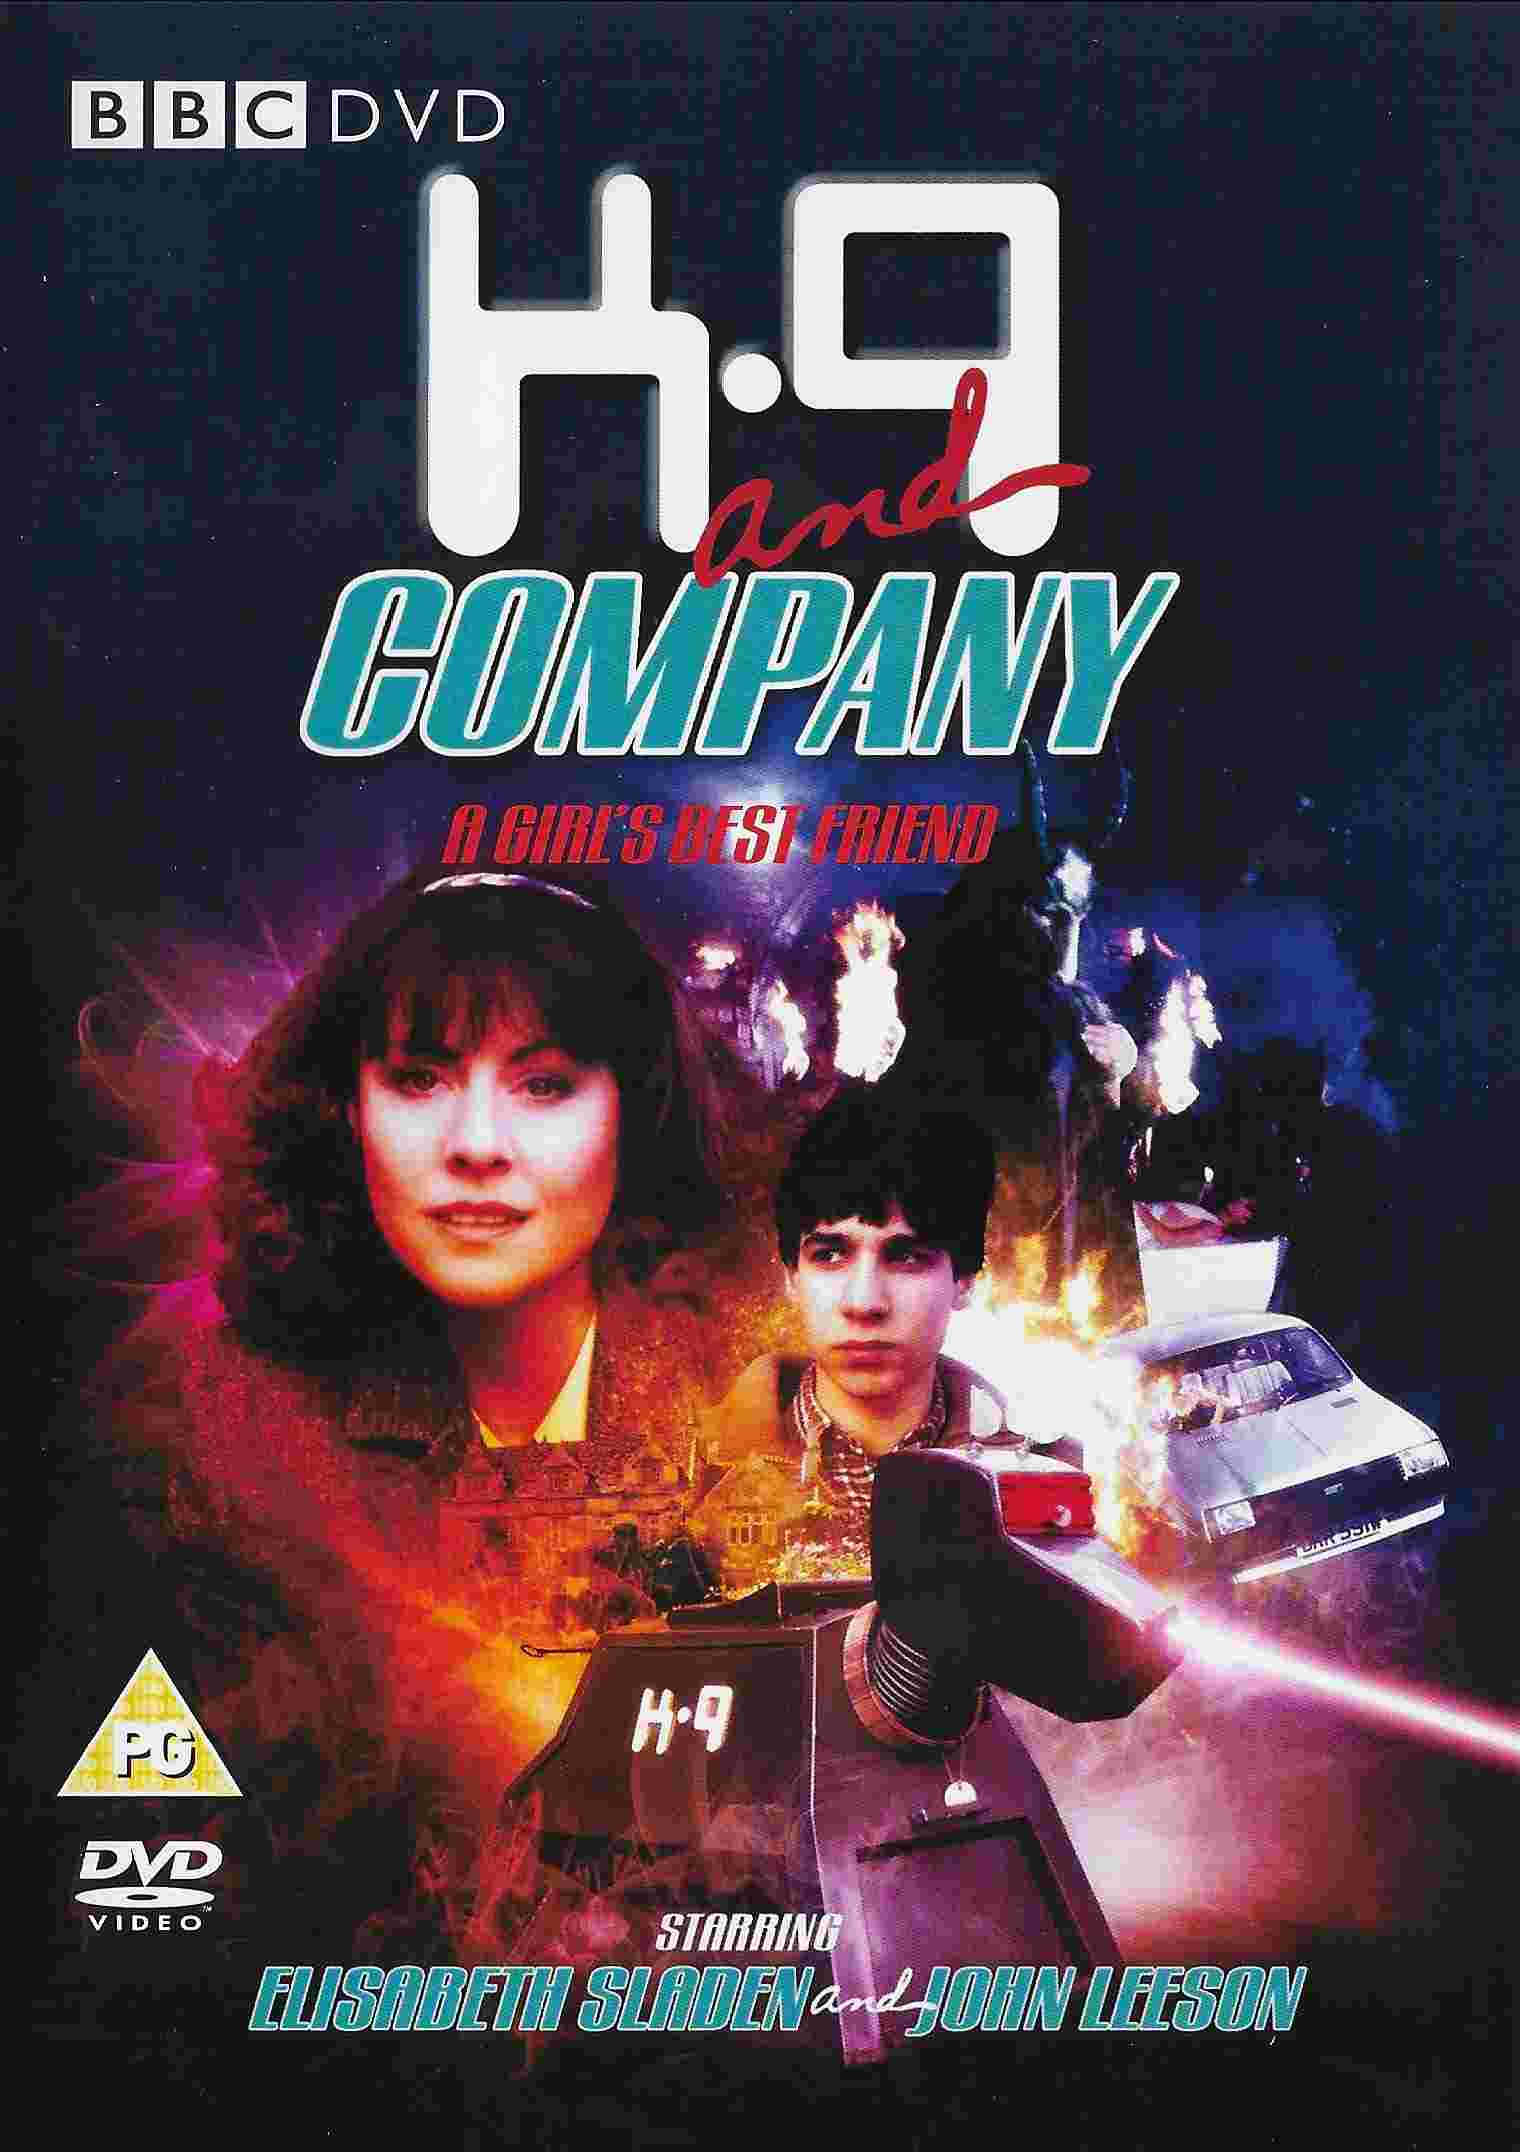 Picture of BBCDVD 2798 K-9 and Company - A girl's best friend DVD by artist Terence Dudley from the BBC records and Tapes library